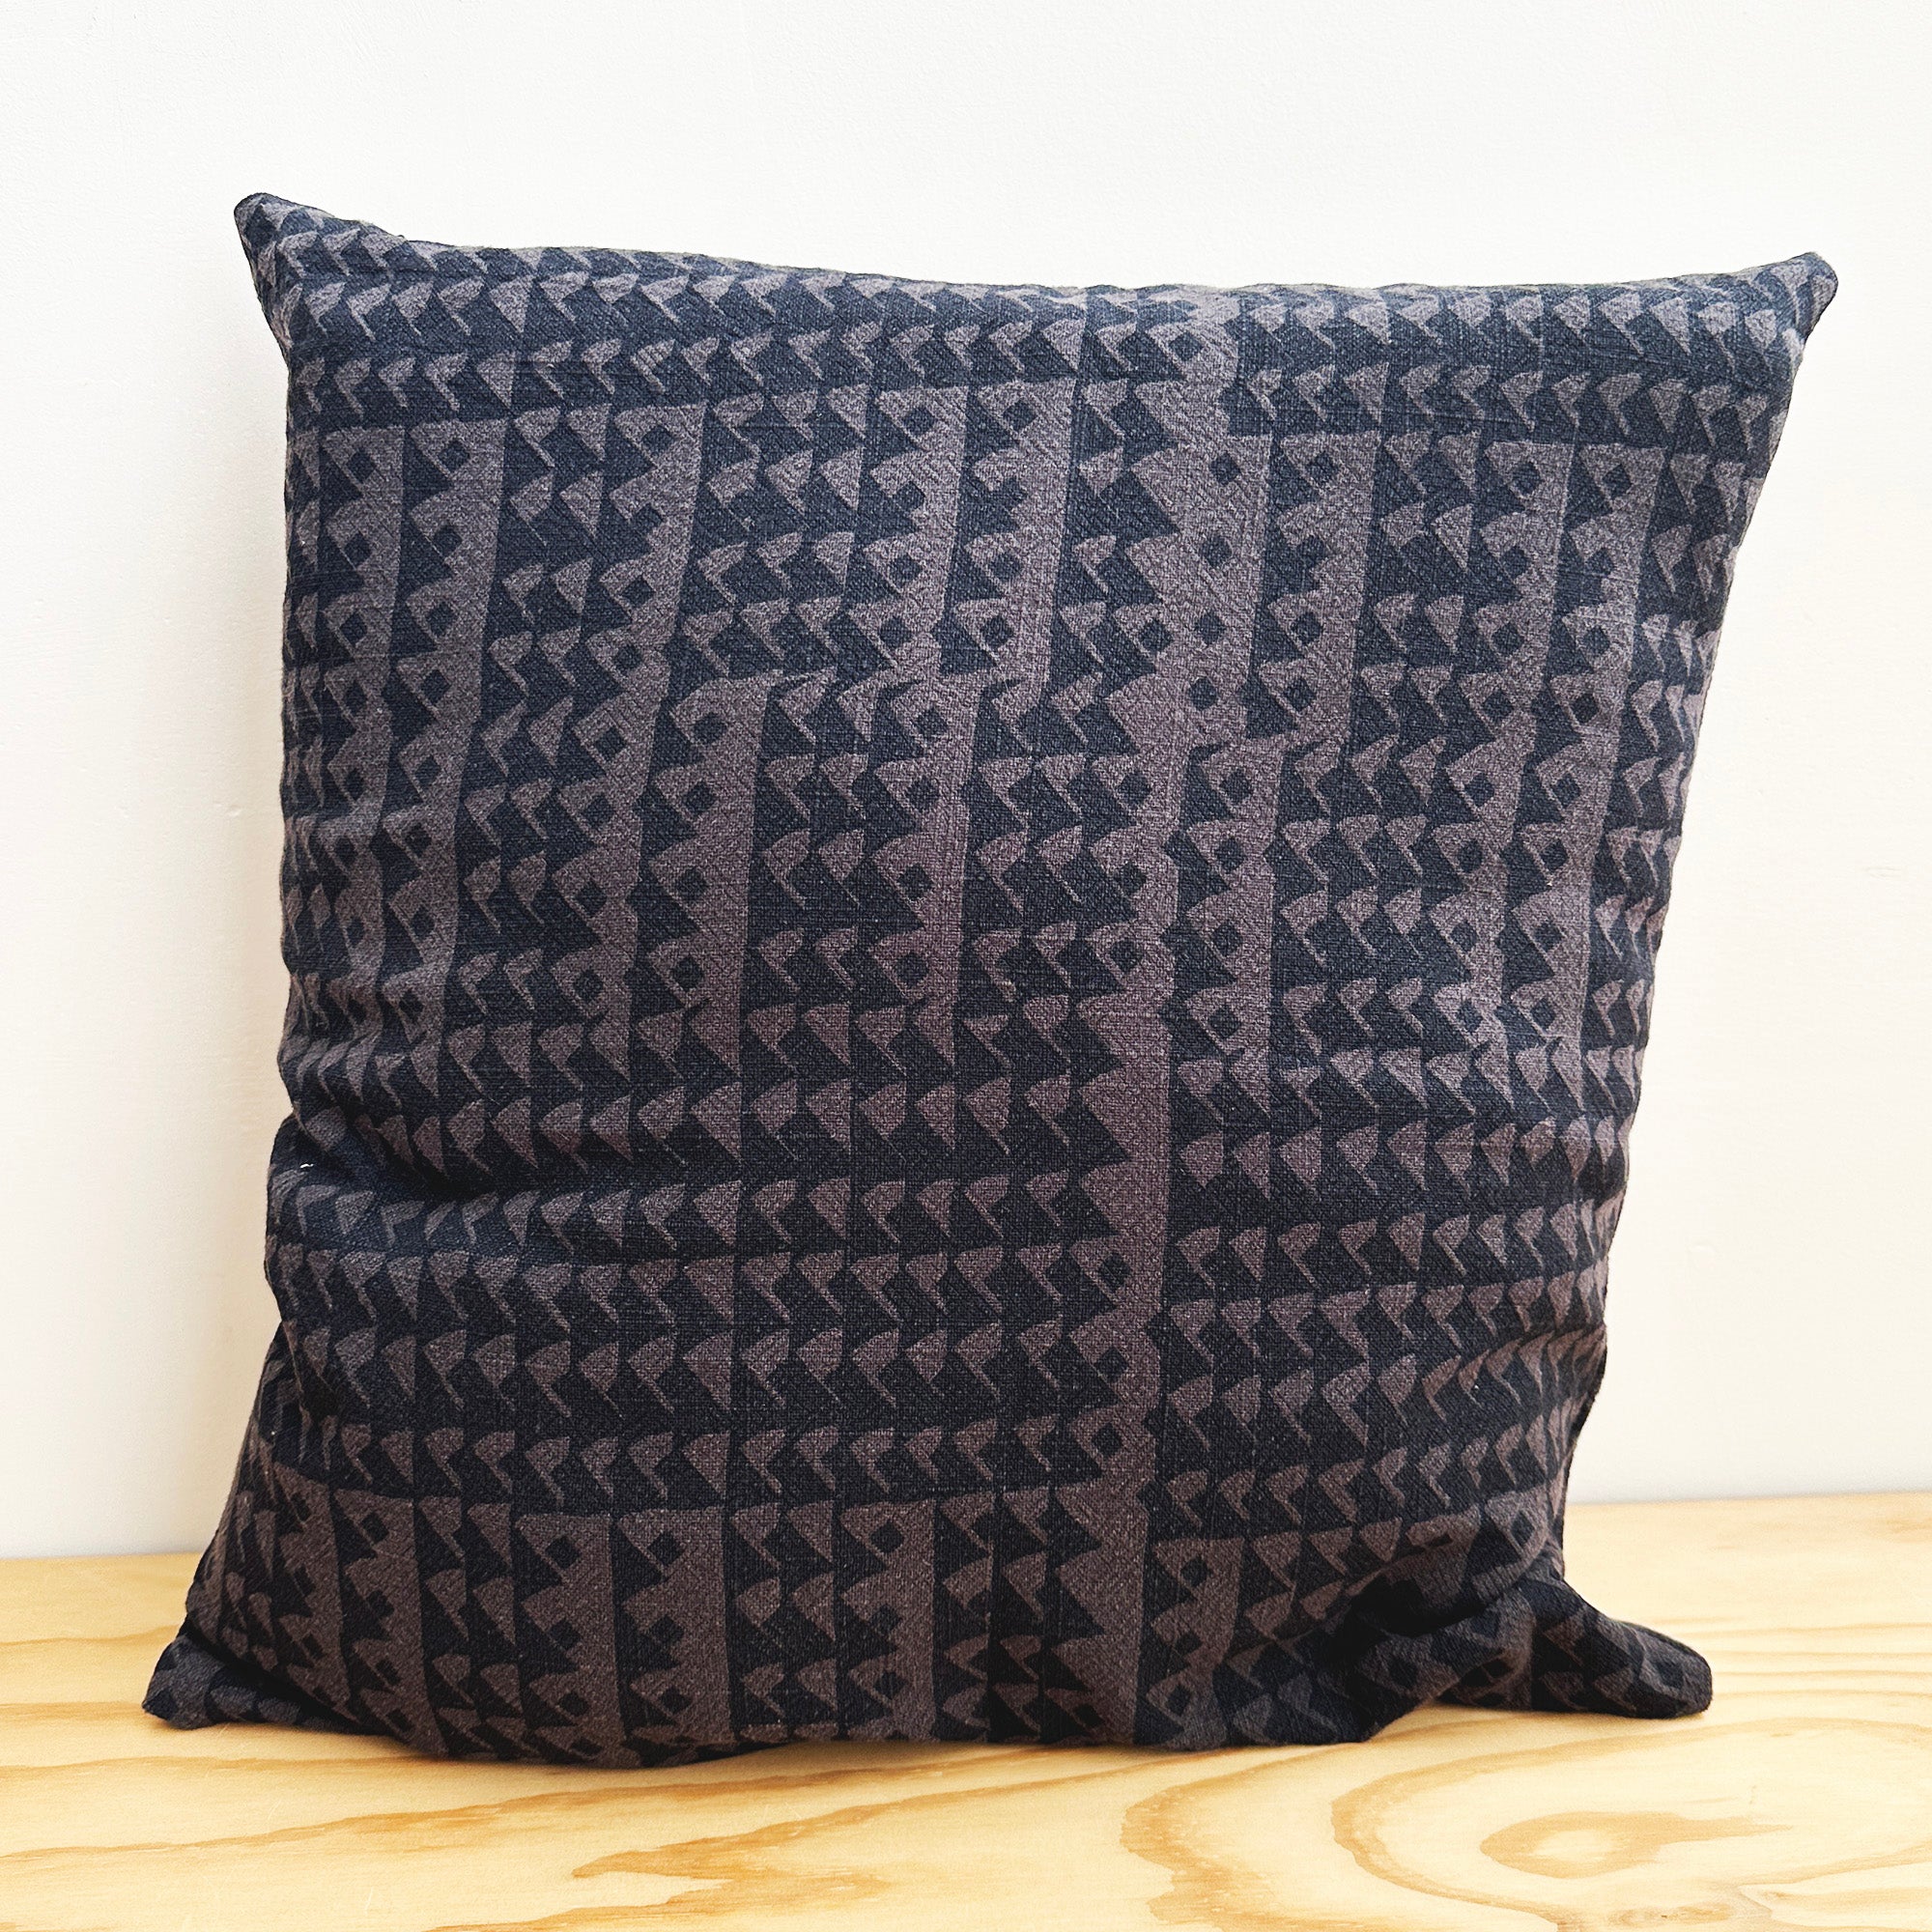 The Square Throw Pillow - Triangles in Midnight and Faded Black